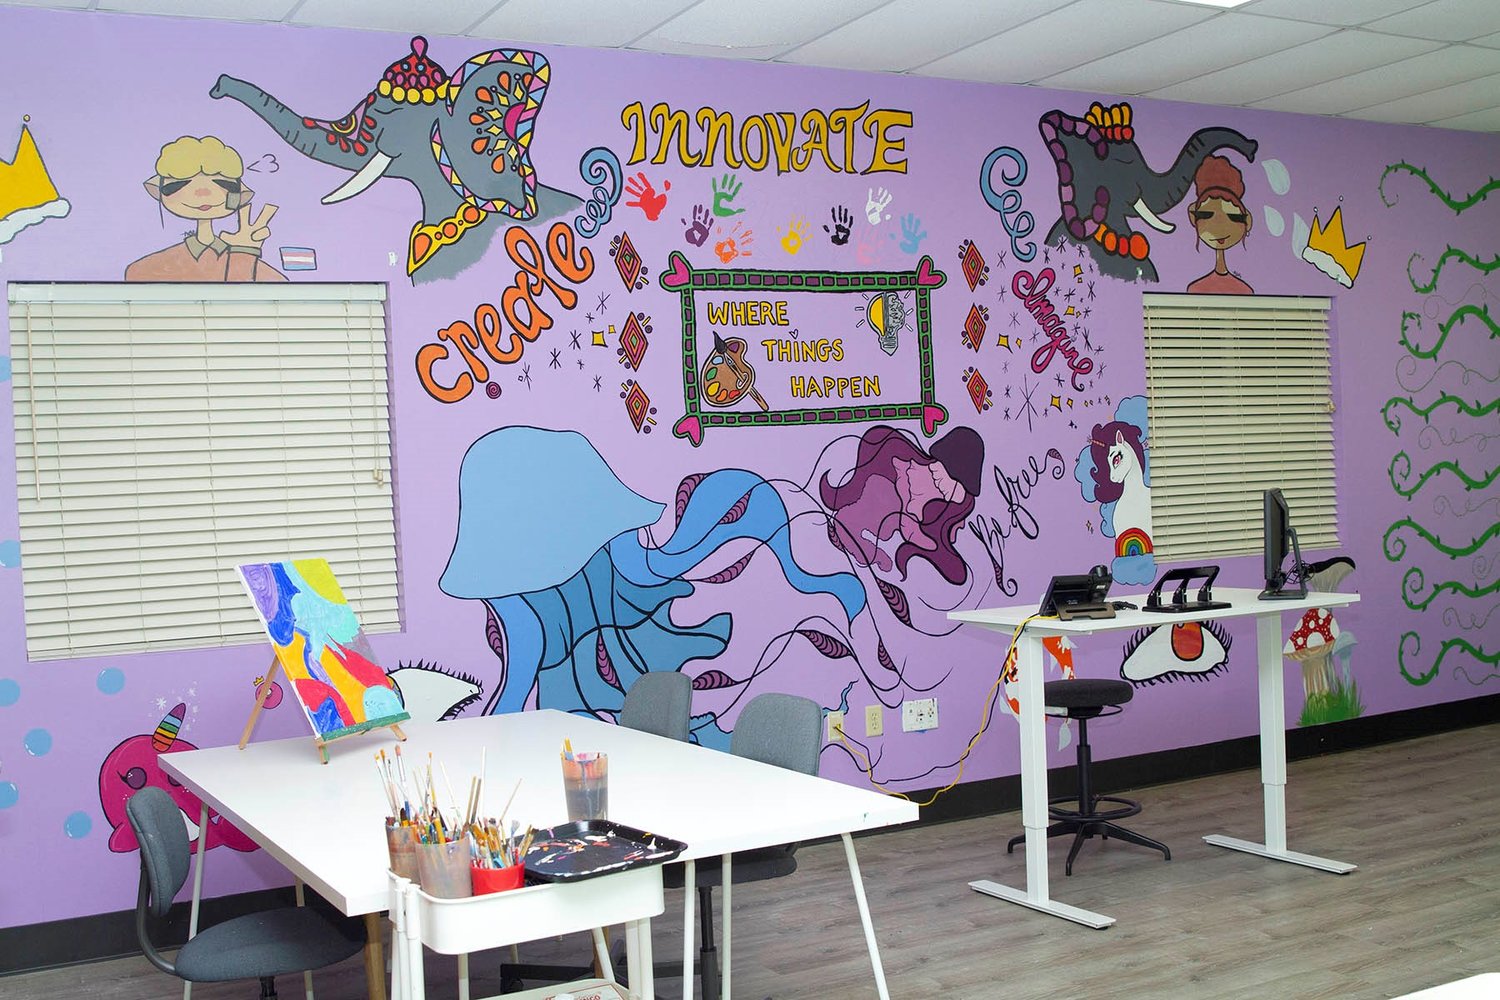 Pace provides girls safe spaces to express themselves through art and other creative outlets.